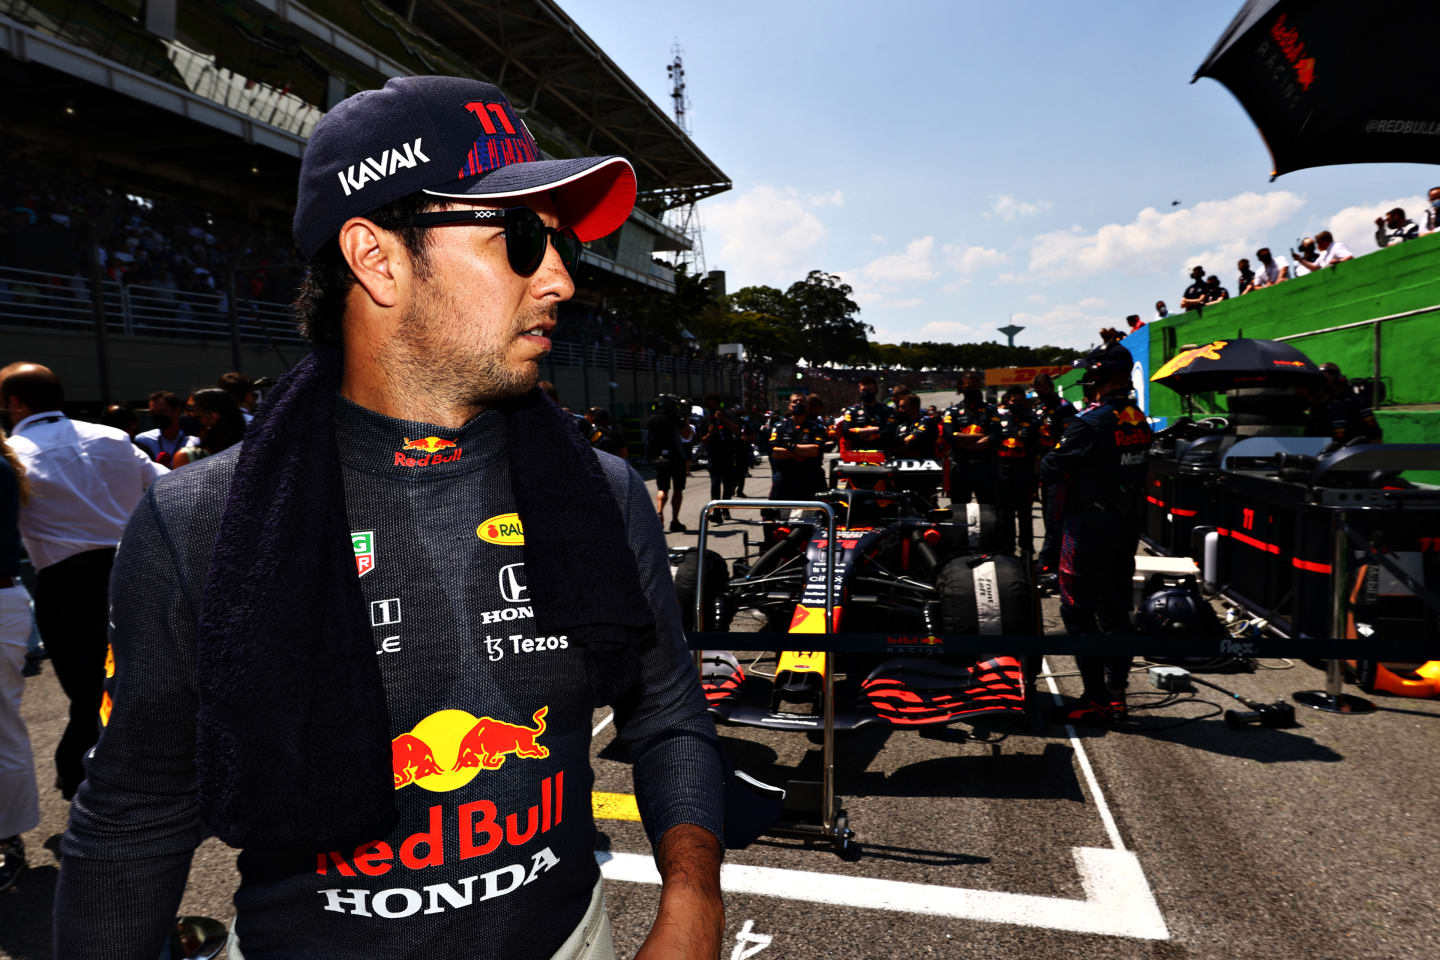 SAO PAULO, BRAZIL - NOVEMBER 14: Sergio Perez of Mexico and Red Bull Racing prepares to drive on the grid during the F1 Grand Prix of Brazil at Autodromo Jose Carlos Pace on November 14, 2021 in Sao Paulo, Brazil. (Photo by Mark Thompson/Getty Images)